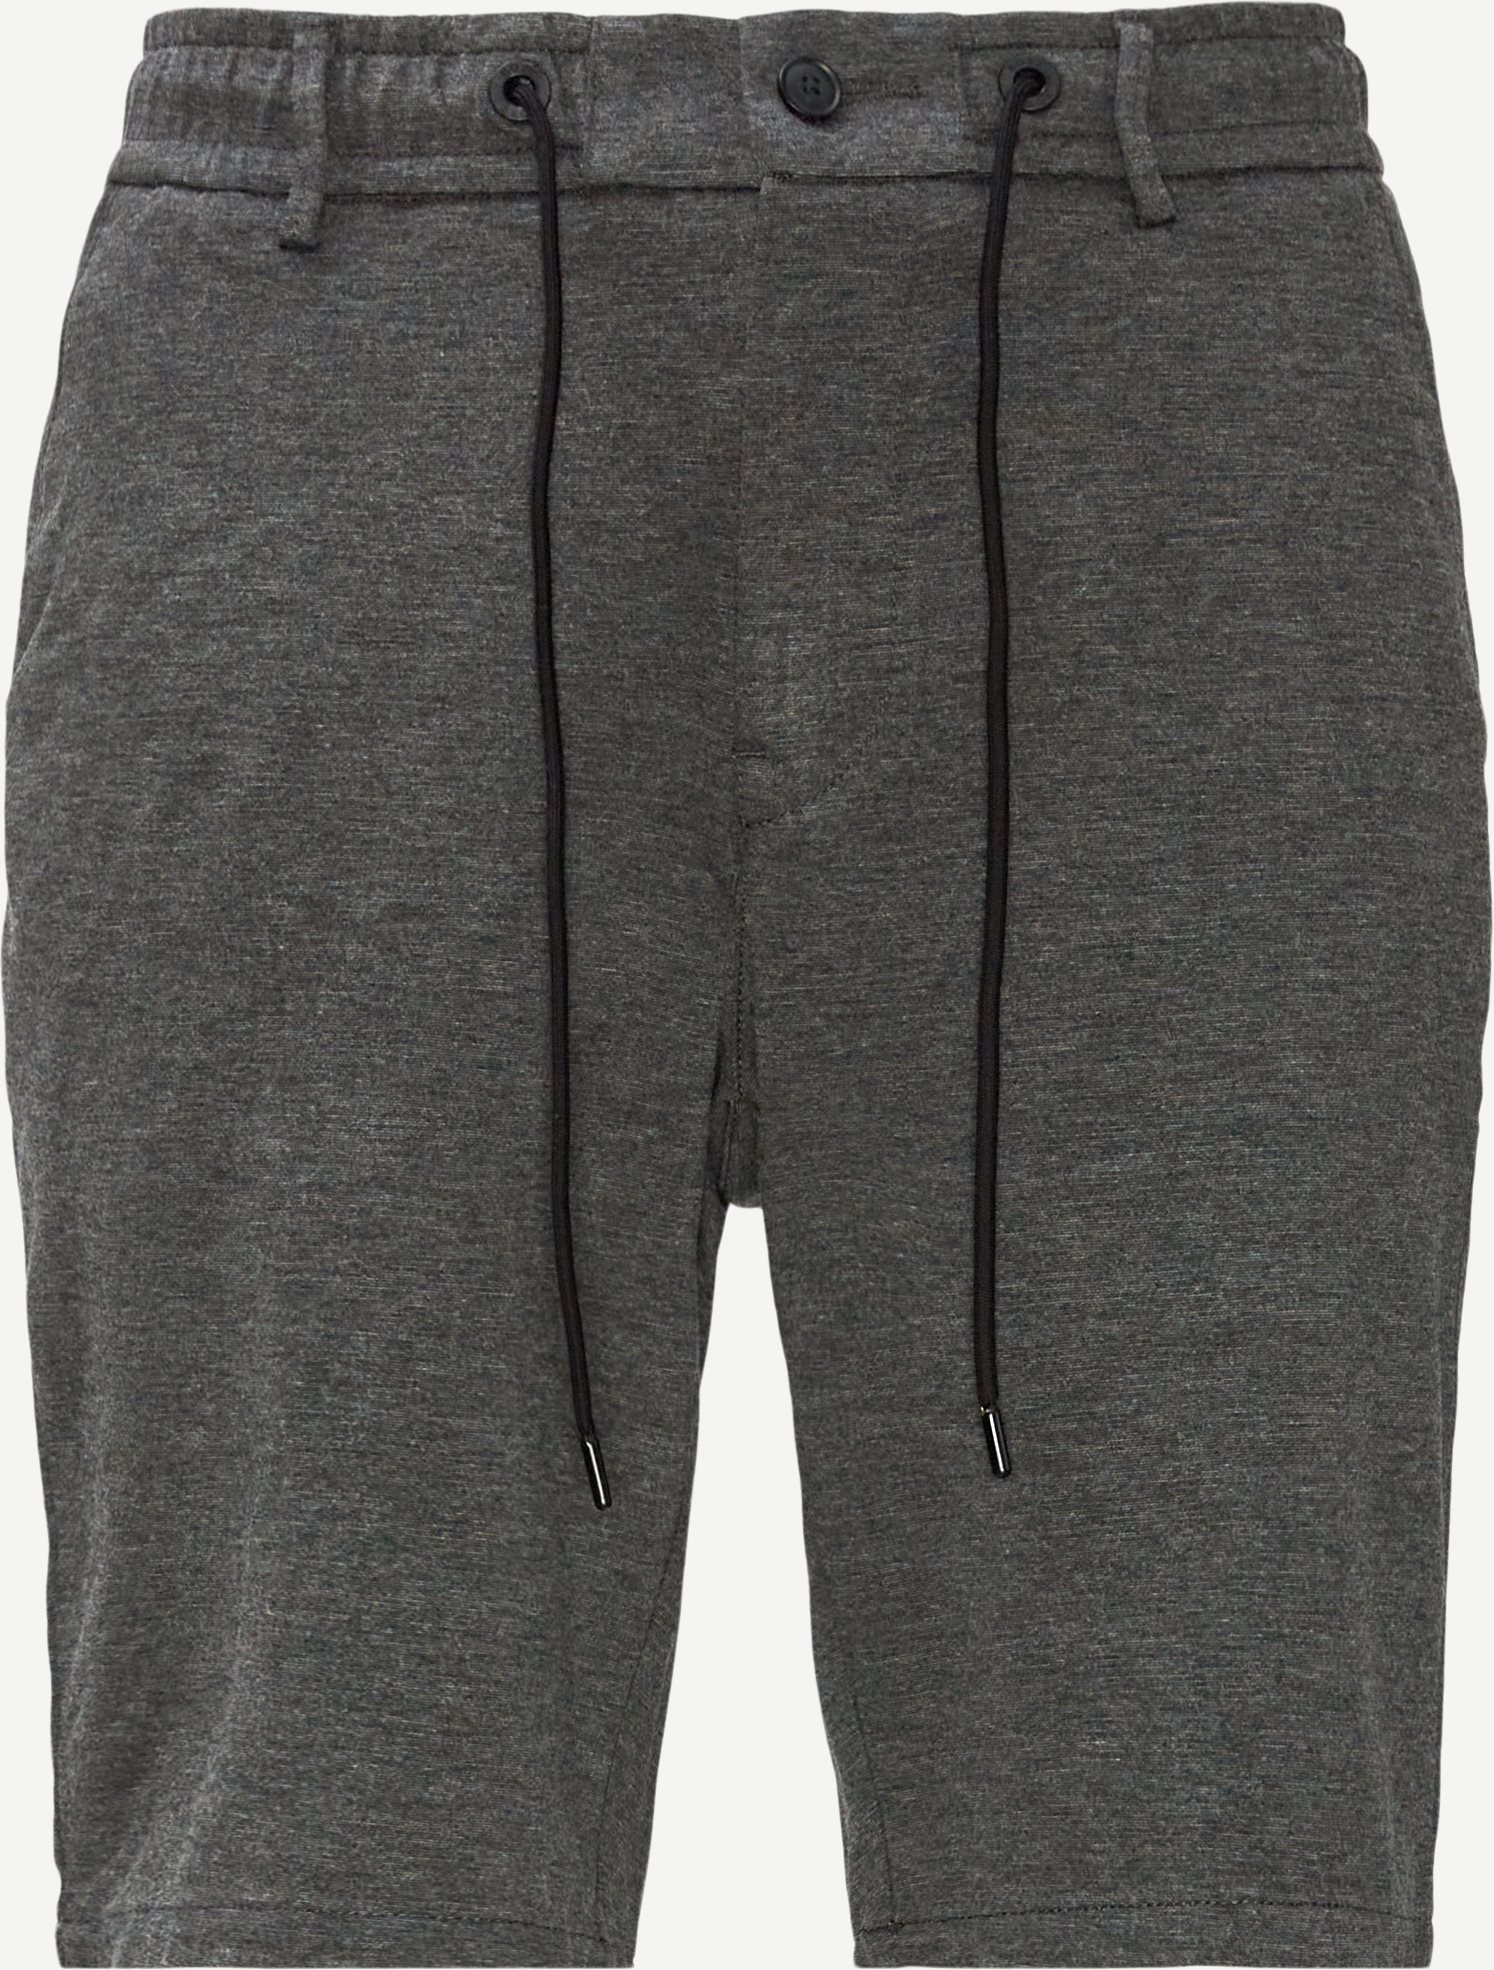 Shorts - Tapered fit - Grey